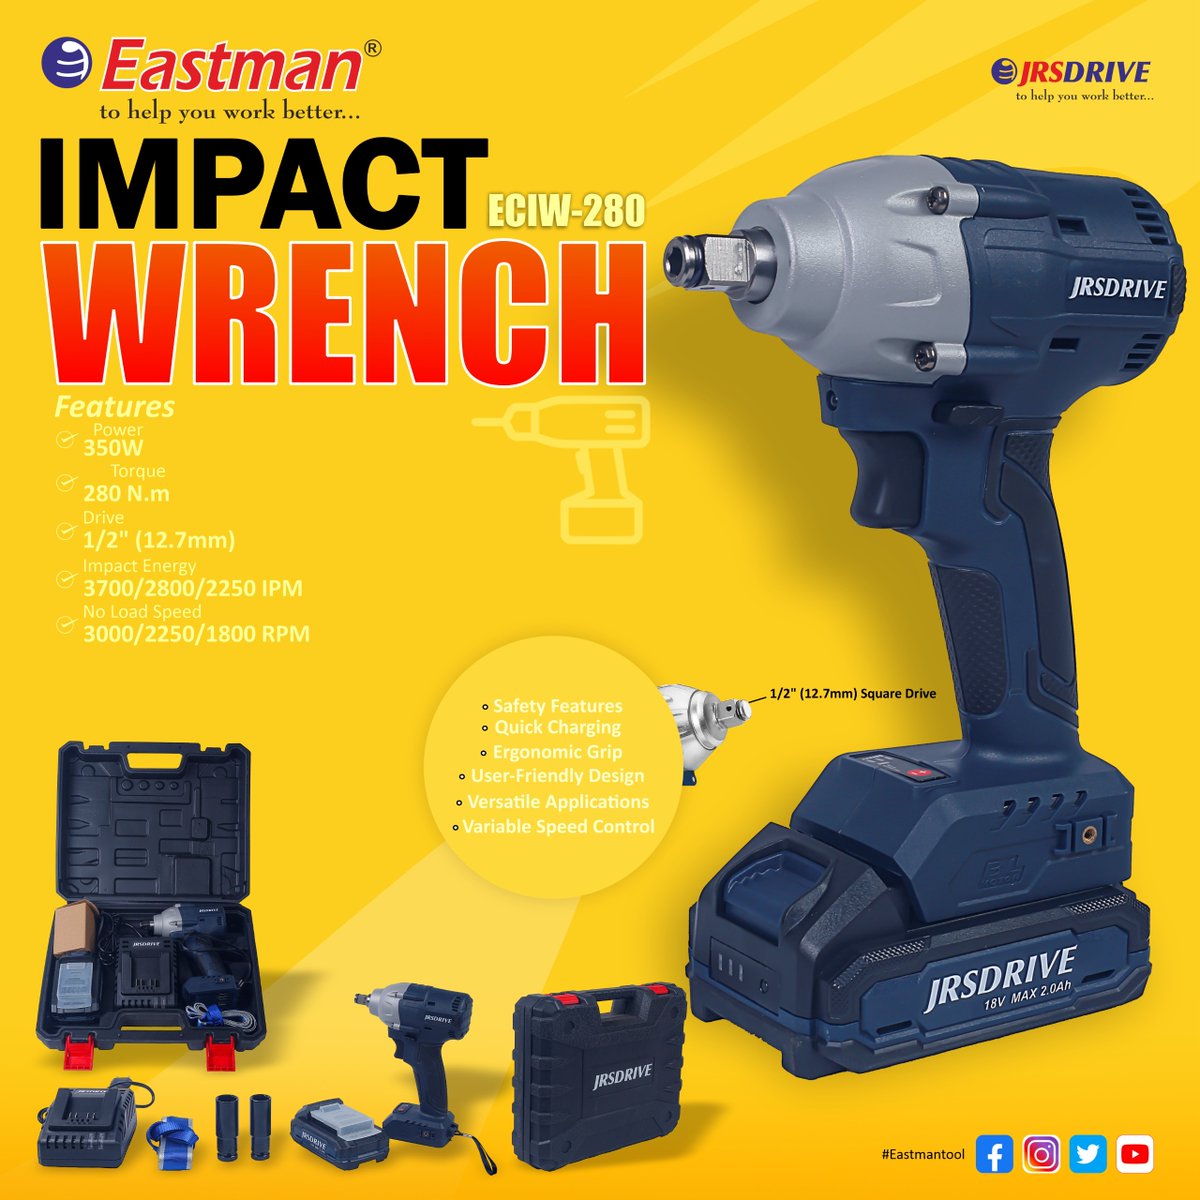 Compact yet very powerful – the Eastman cordless impact driver/wrench is the best choice for users who need to drive big screws or tighten/loosen bolts with high speed.#eastman #eastmantool #handtools #powertools #jrsdrive #impactwrench #VersatileStyle #userfriendly #bestdesign